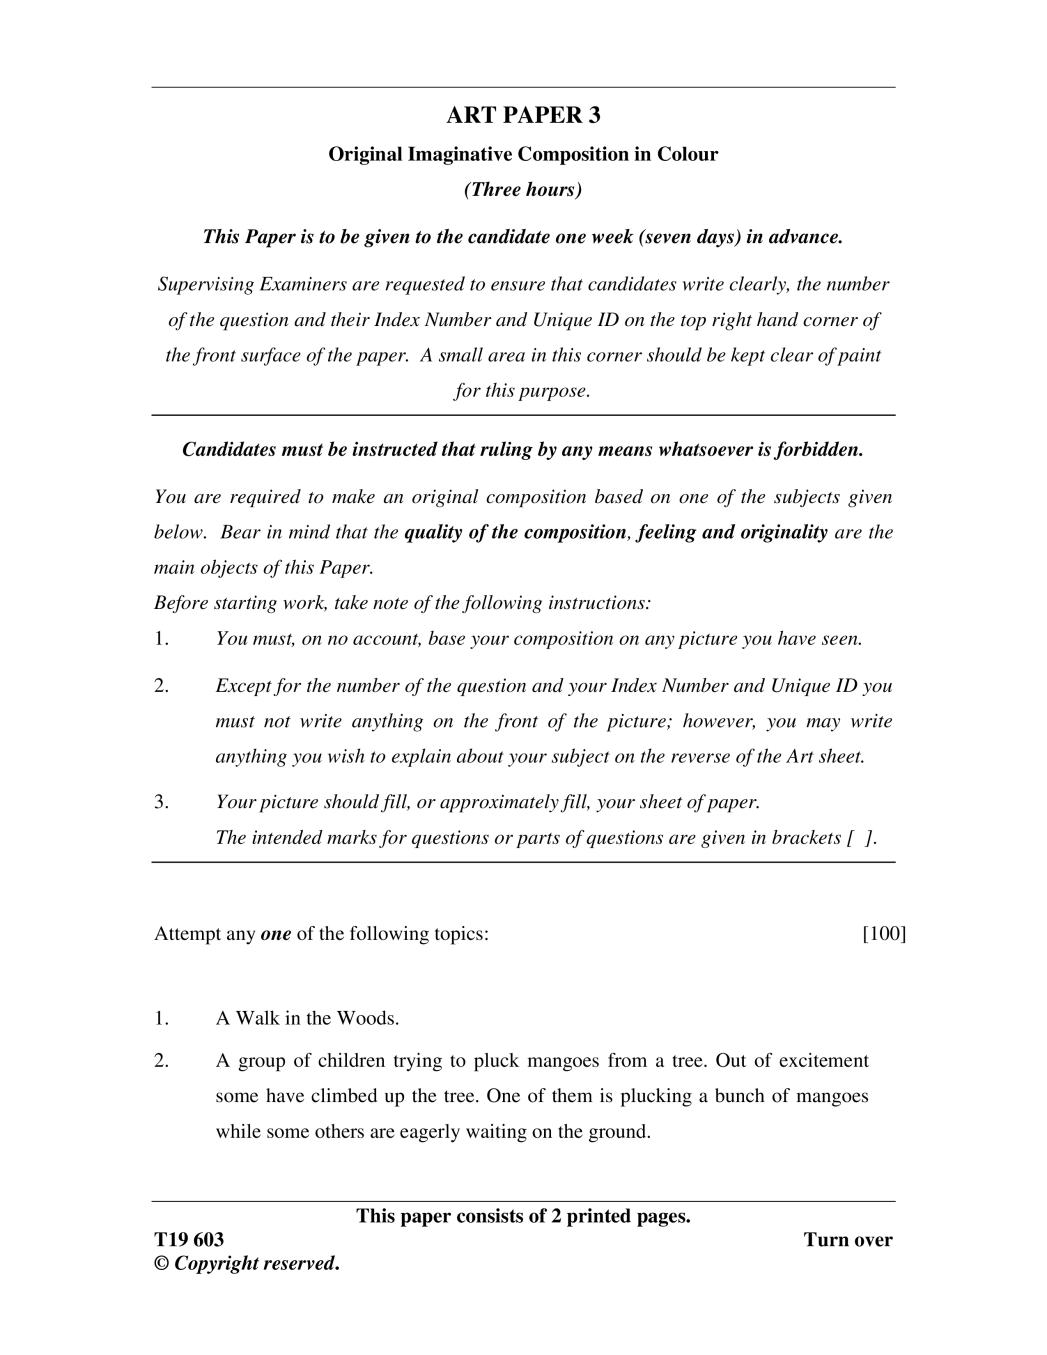 ICSE Class 10 Question Paper 2019 for Art Paper 3 - Page 1